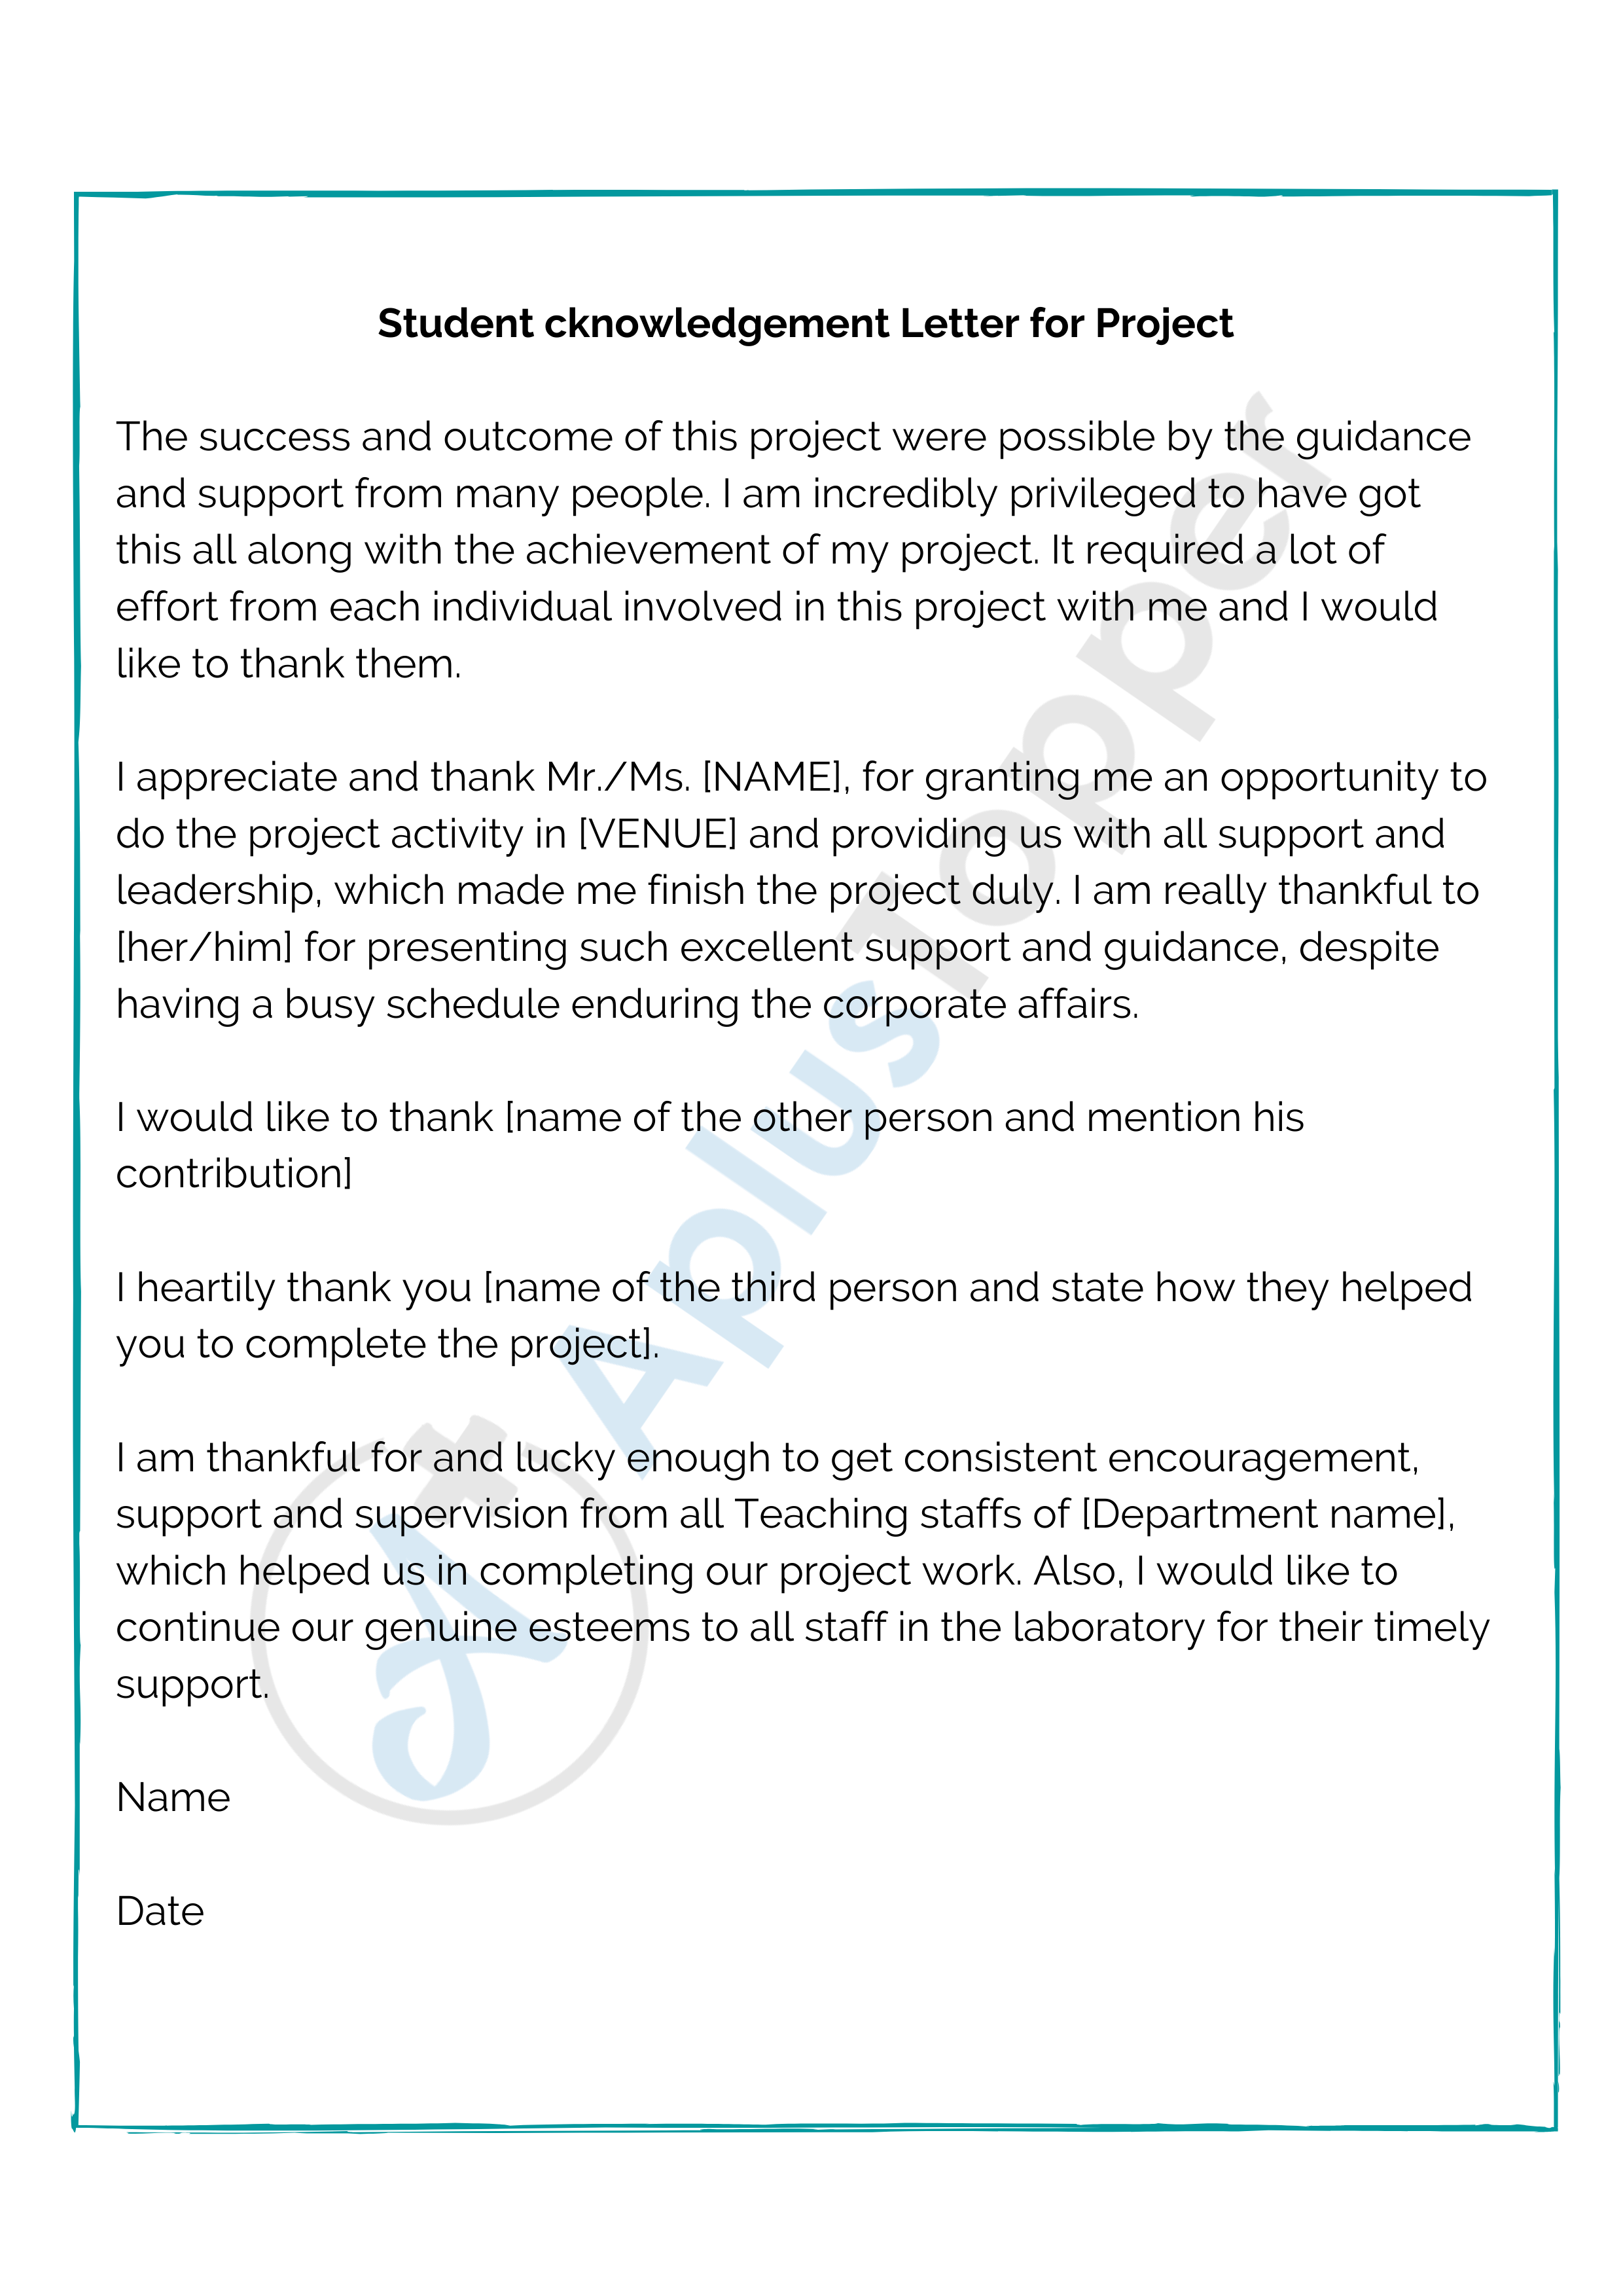 Student Acknowledgement Letter for Project